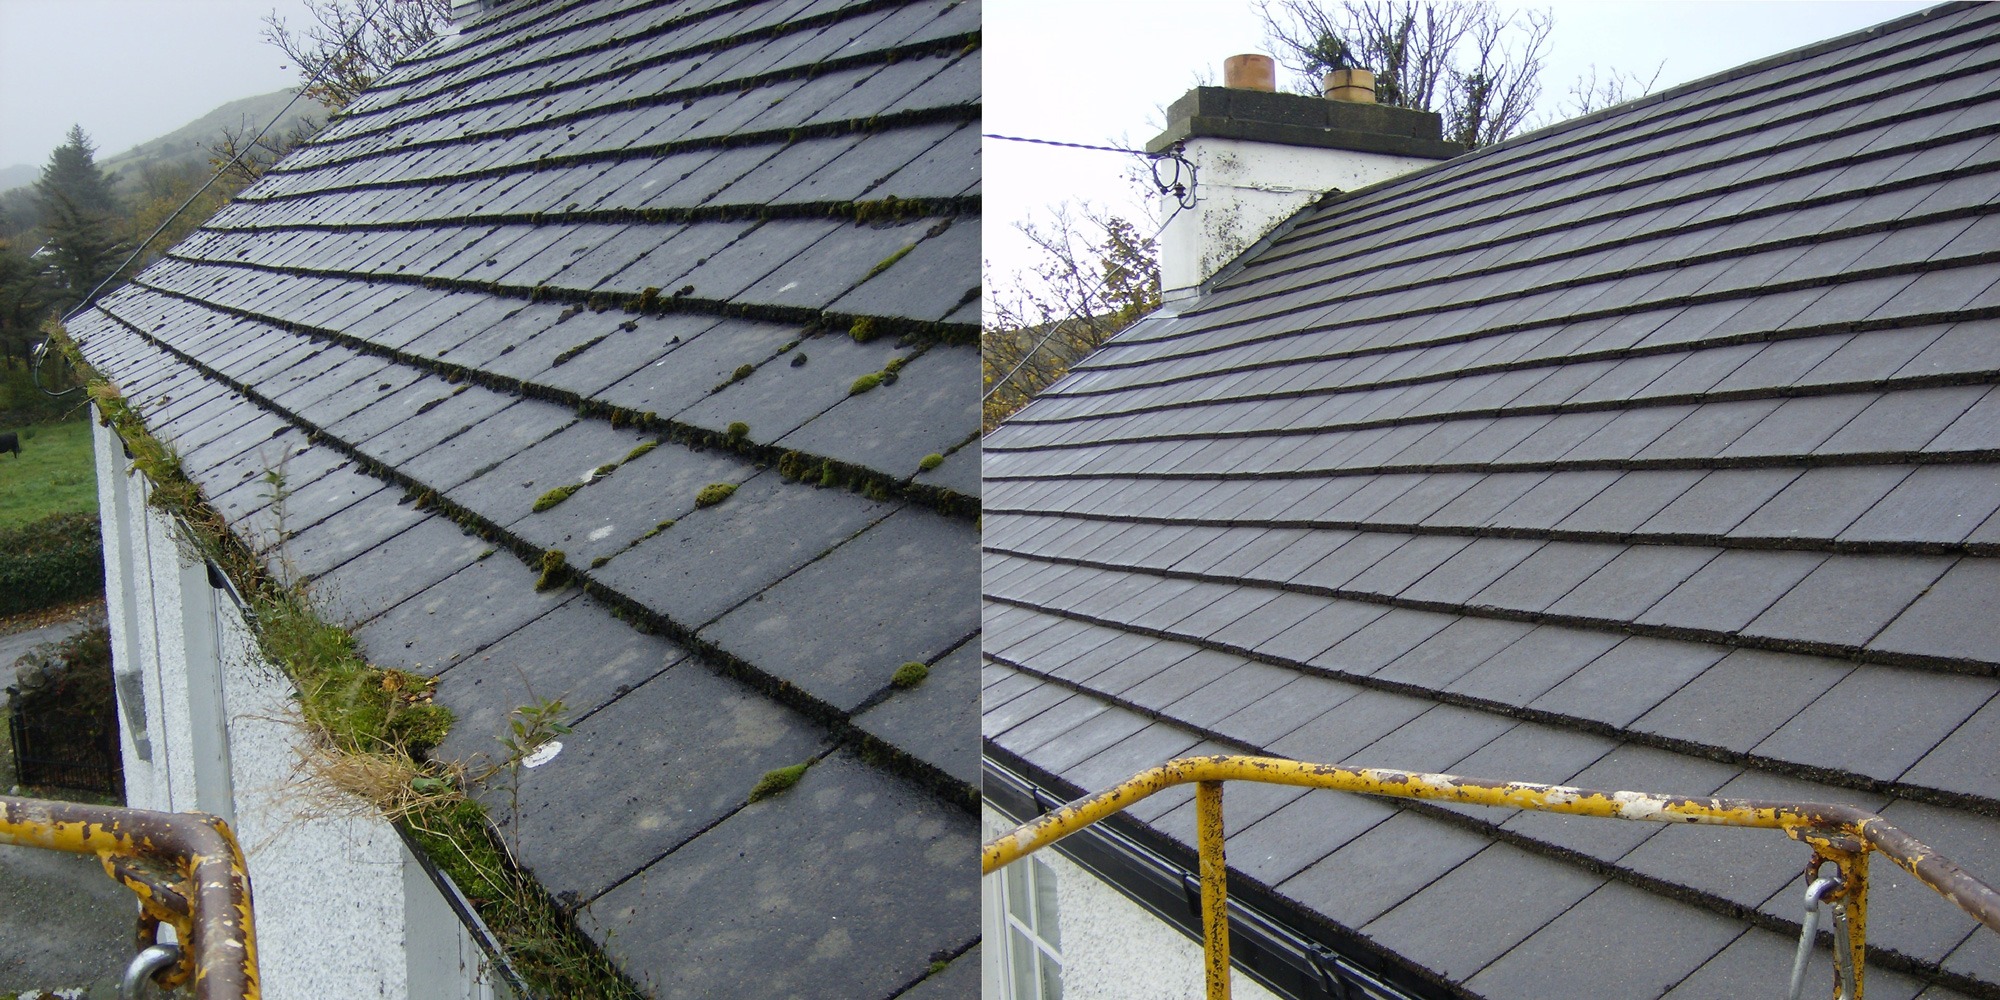 Roof-cleaning-&-Gutter-Cleaning-services-in-Mayo,-Sligo,-Roscommon,-Galway-Ireland